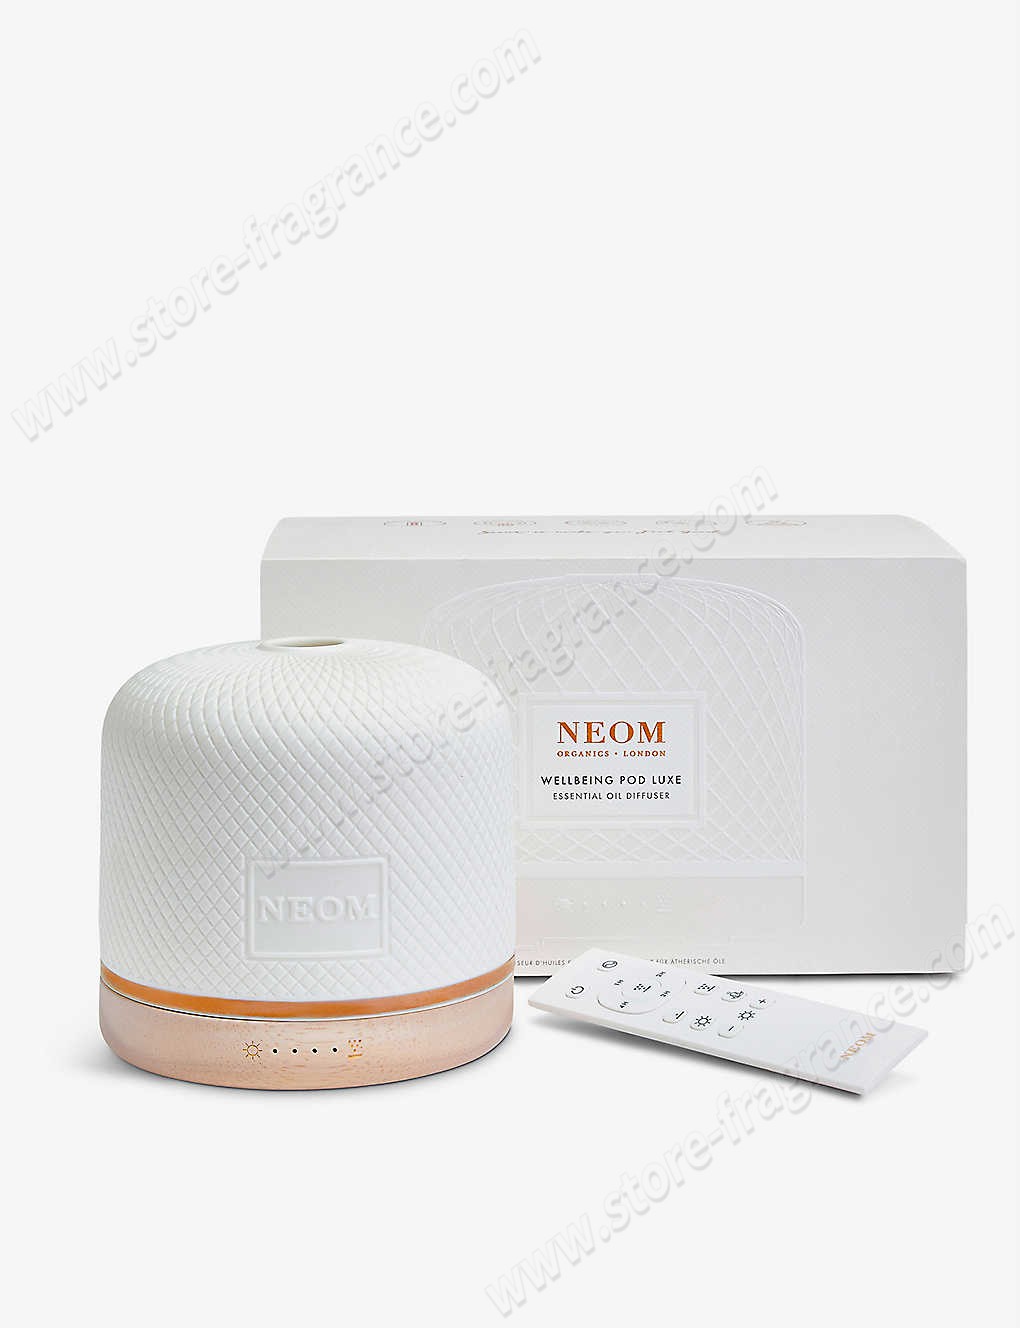 NEOM/Wellbeing Pod Luxe essential oil diffuser ✿ Discount Store - NEOM/Wellbeing Pod Luxe essential oil diffuser ✿ Discount Store